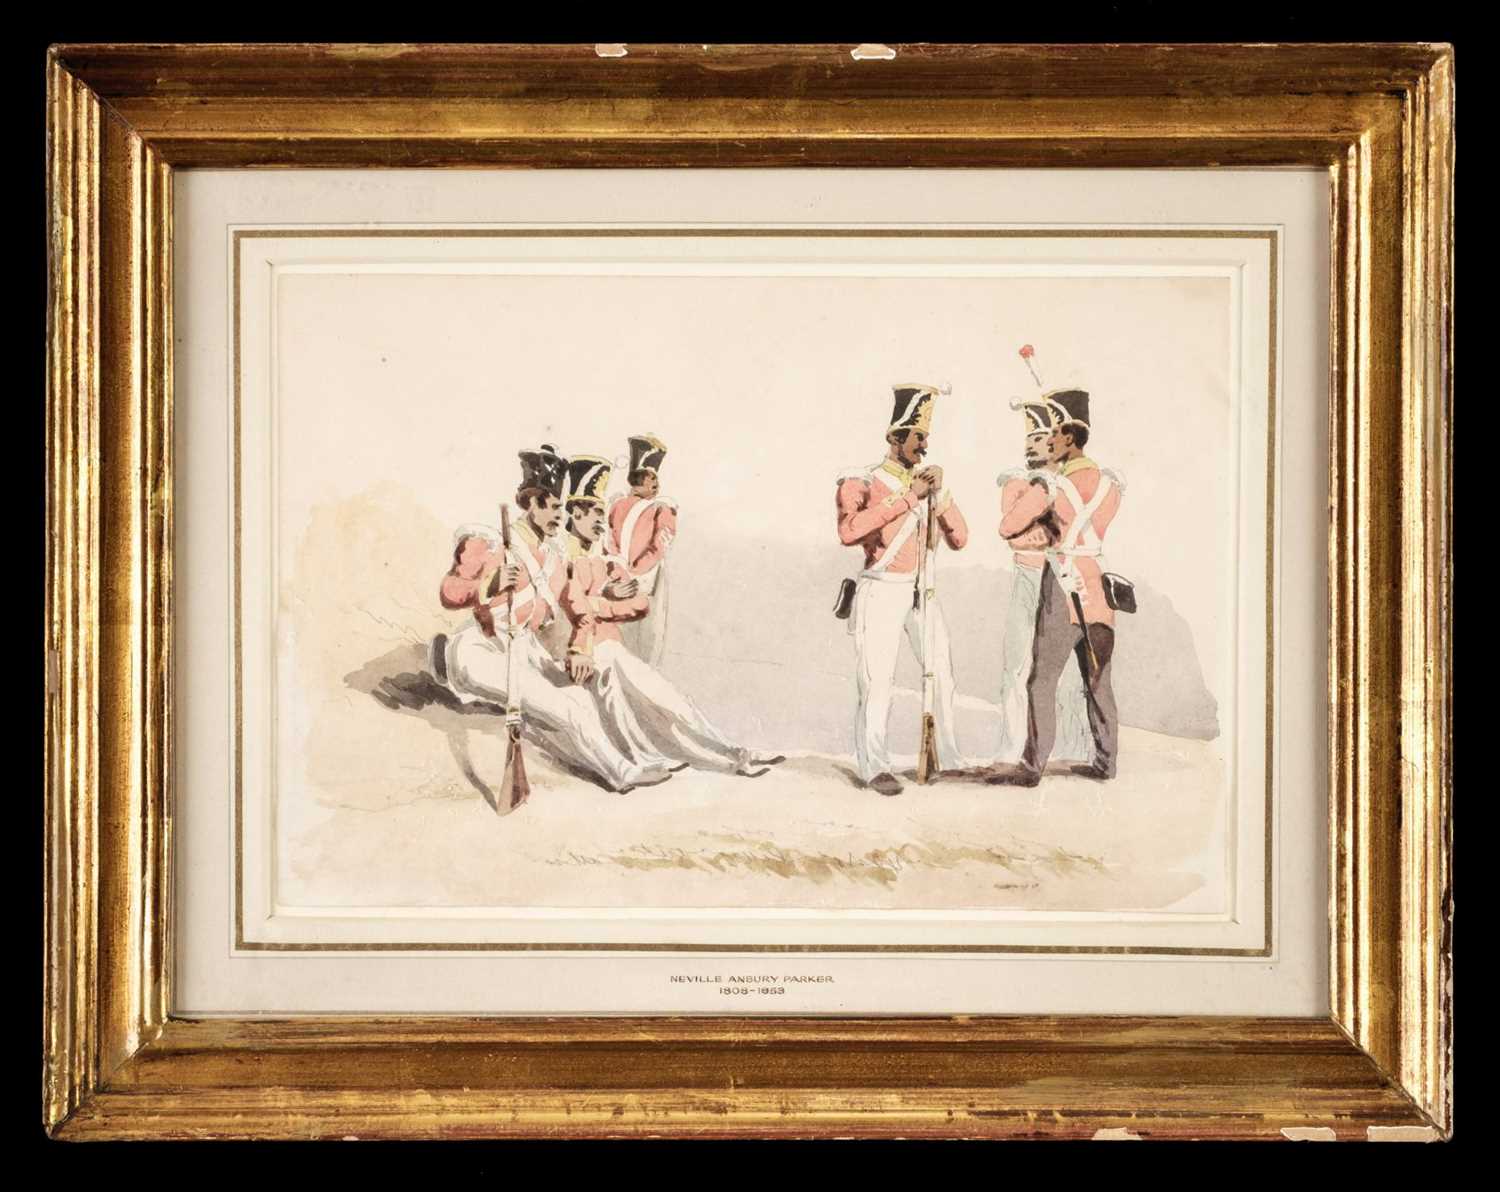 Lot 259 - Parker (Neville Anbury, 1808-1853). Indian sepoys circa 1850 and others